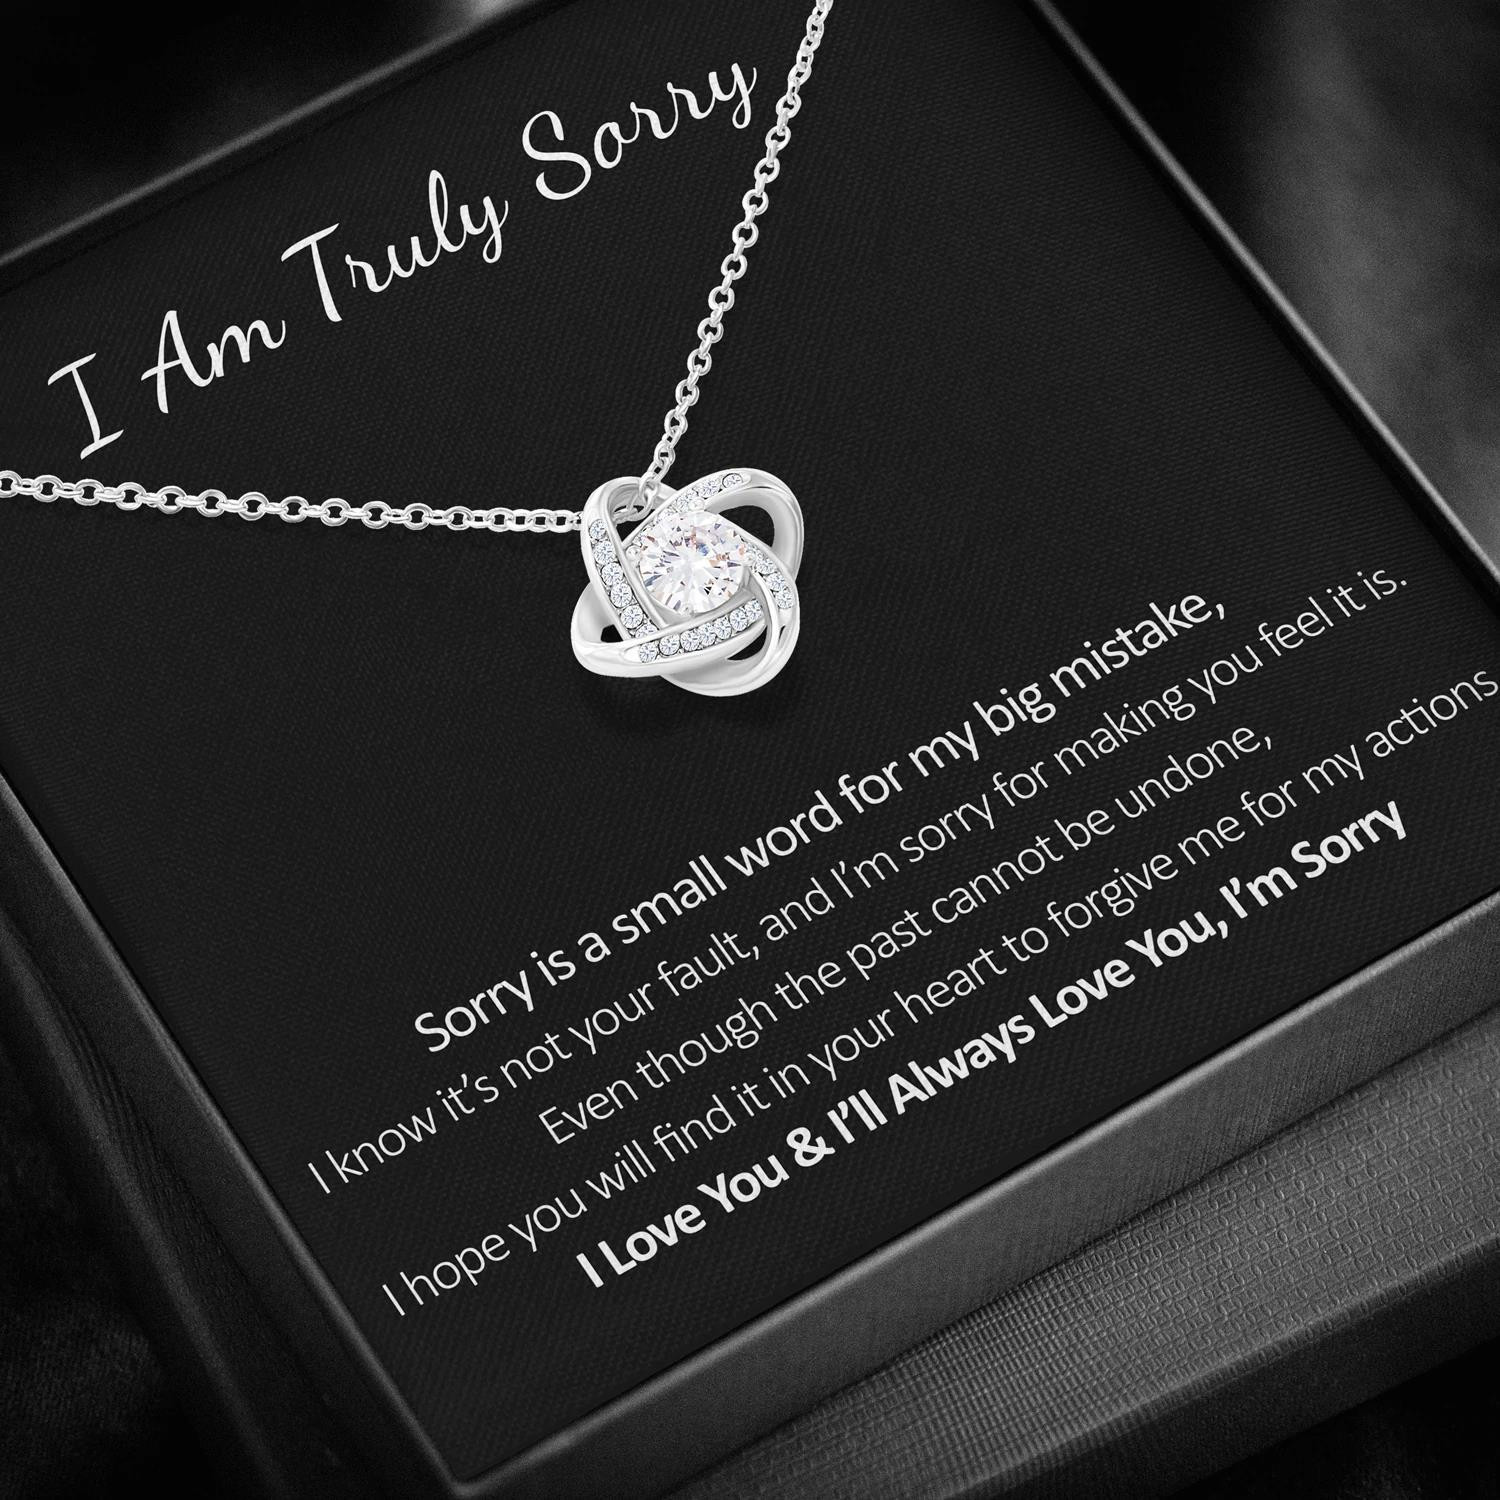 Anniversary Gift For Wife I Am Truly Sorry I Love You Love Knot Necklace